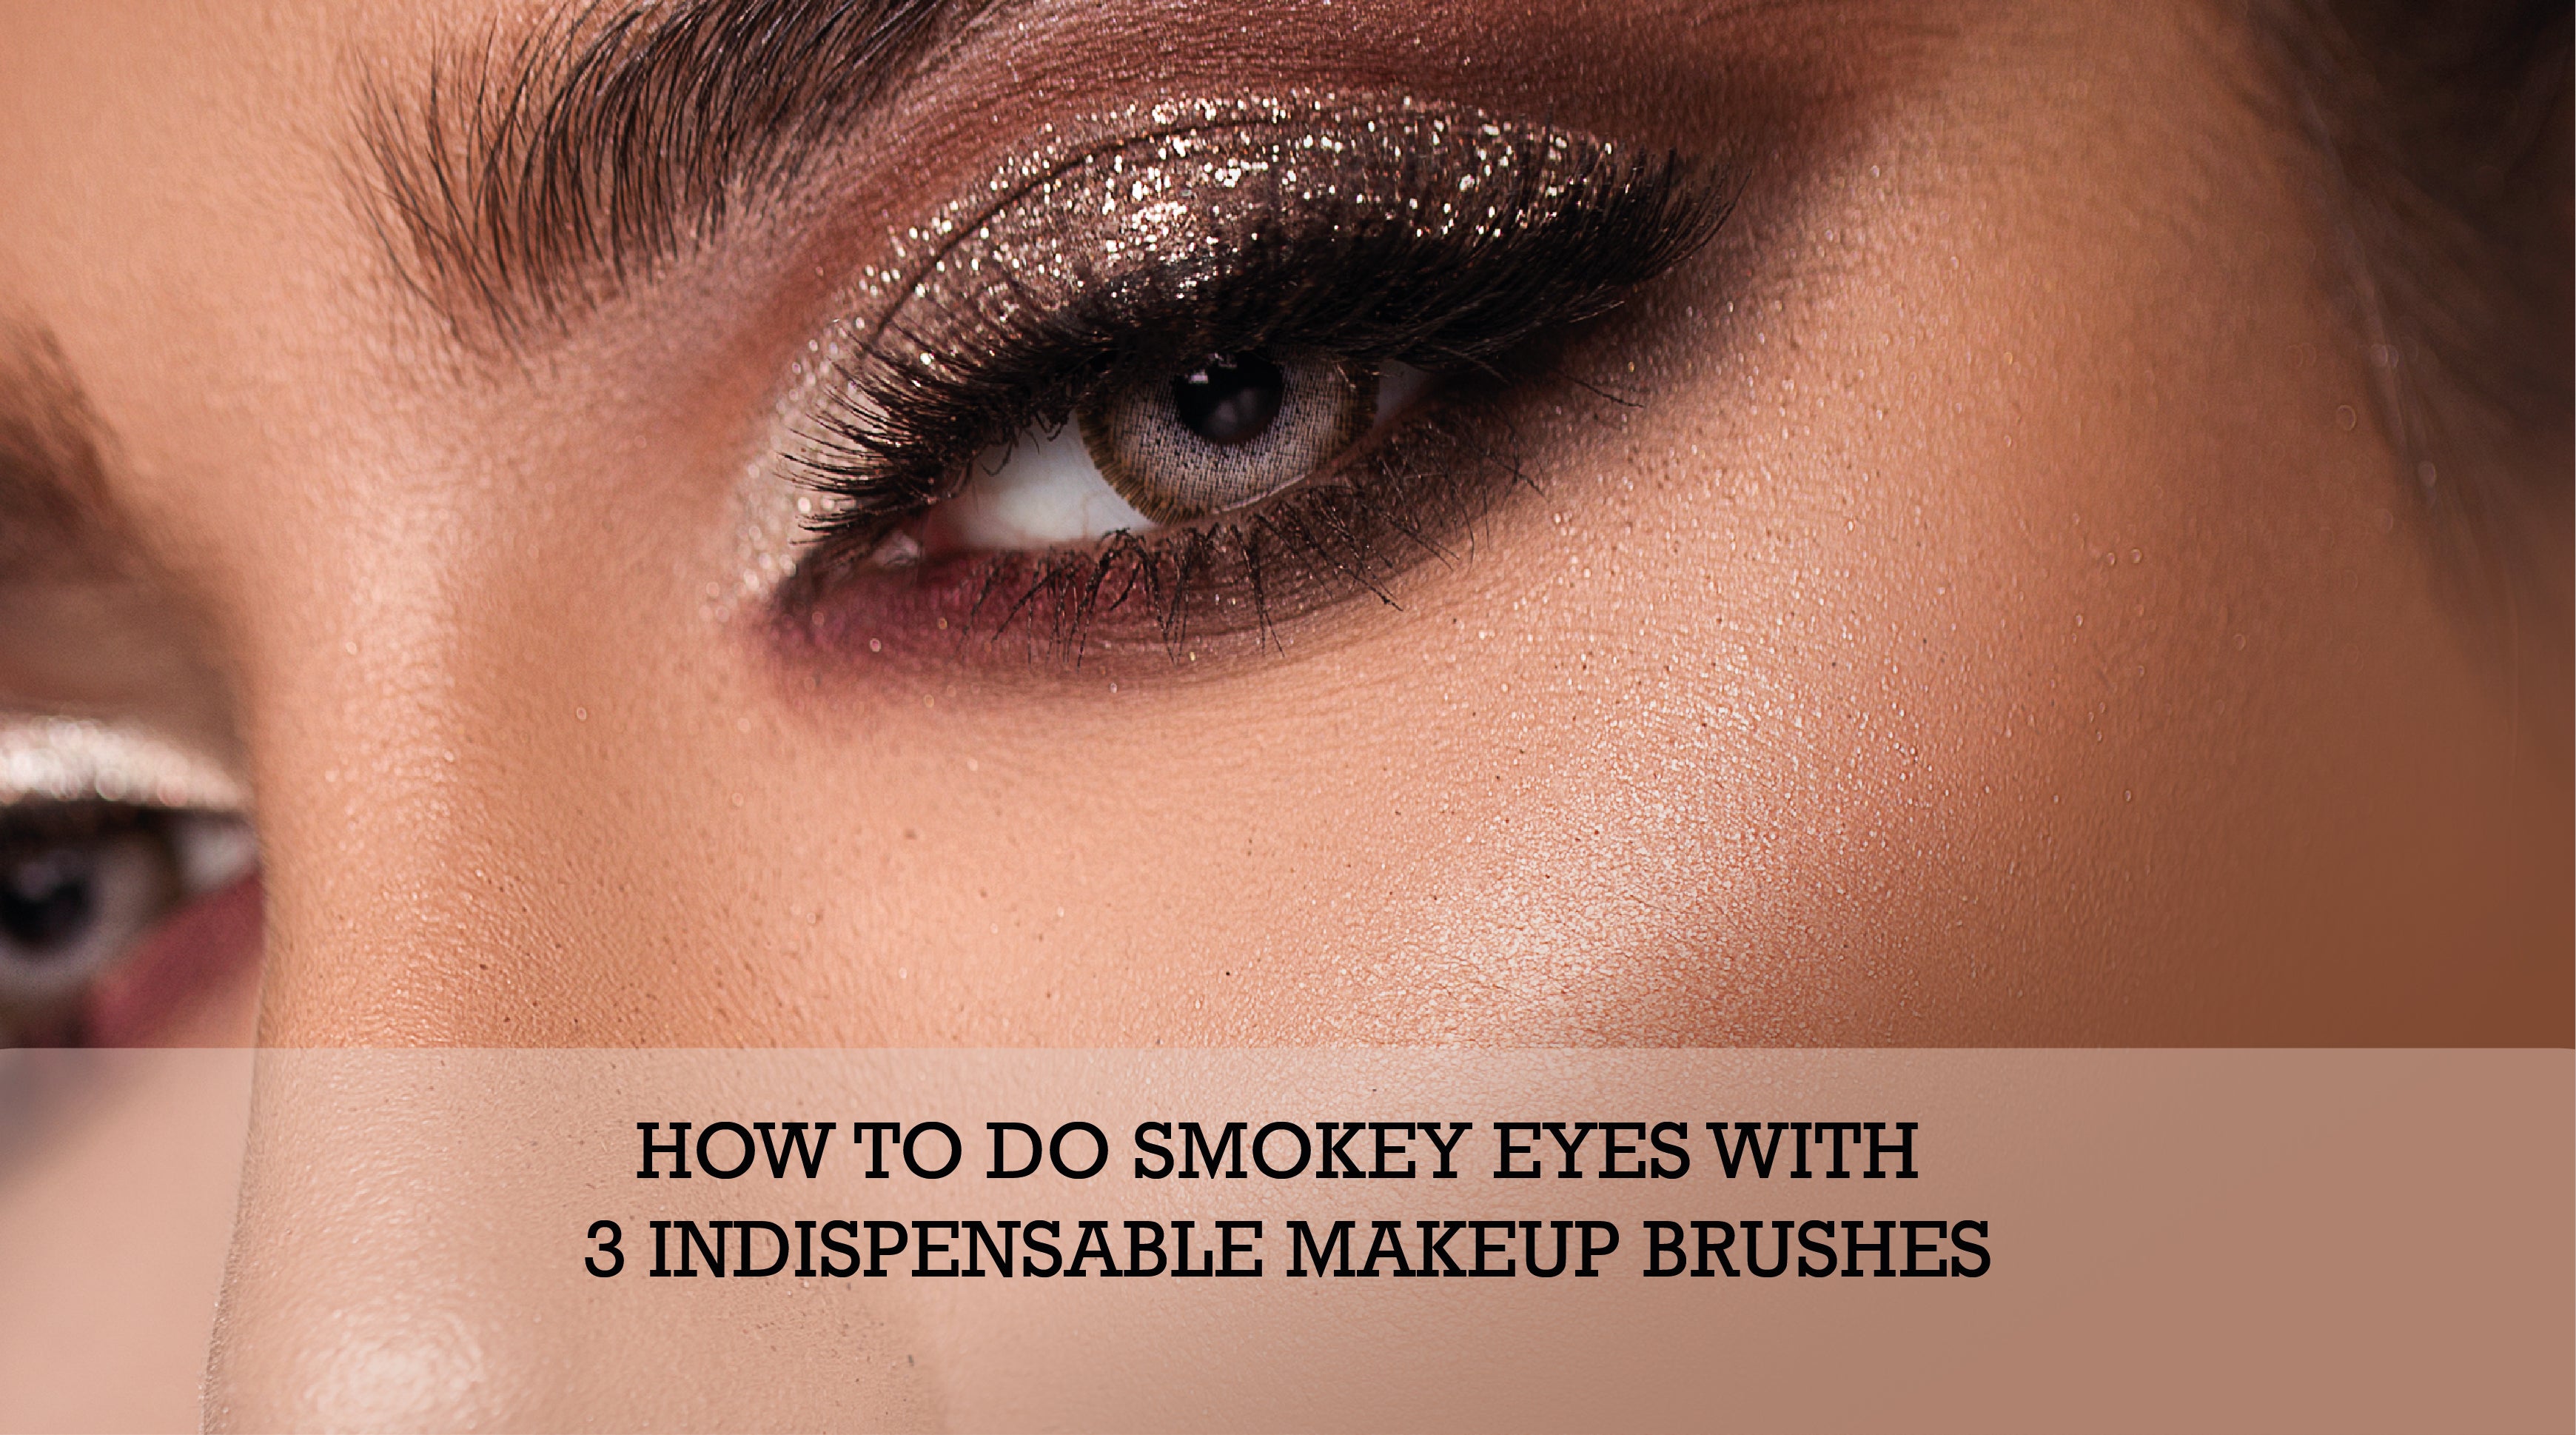 How To Do Smokey Eyes With 3